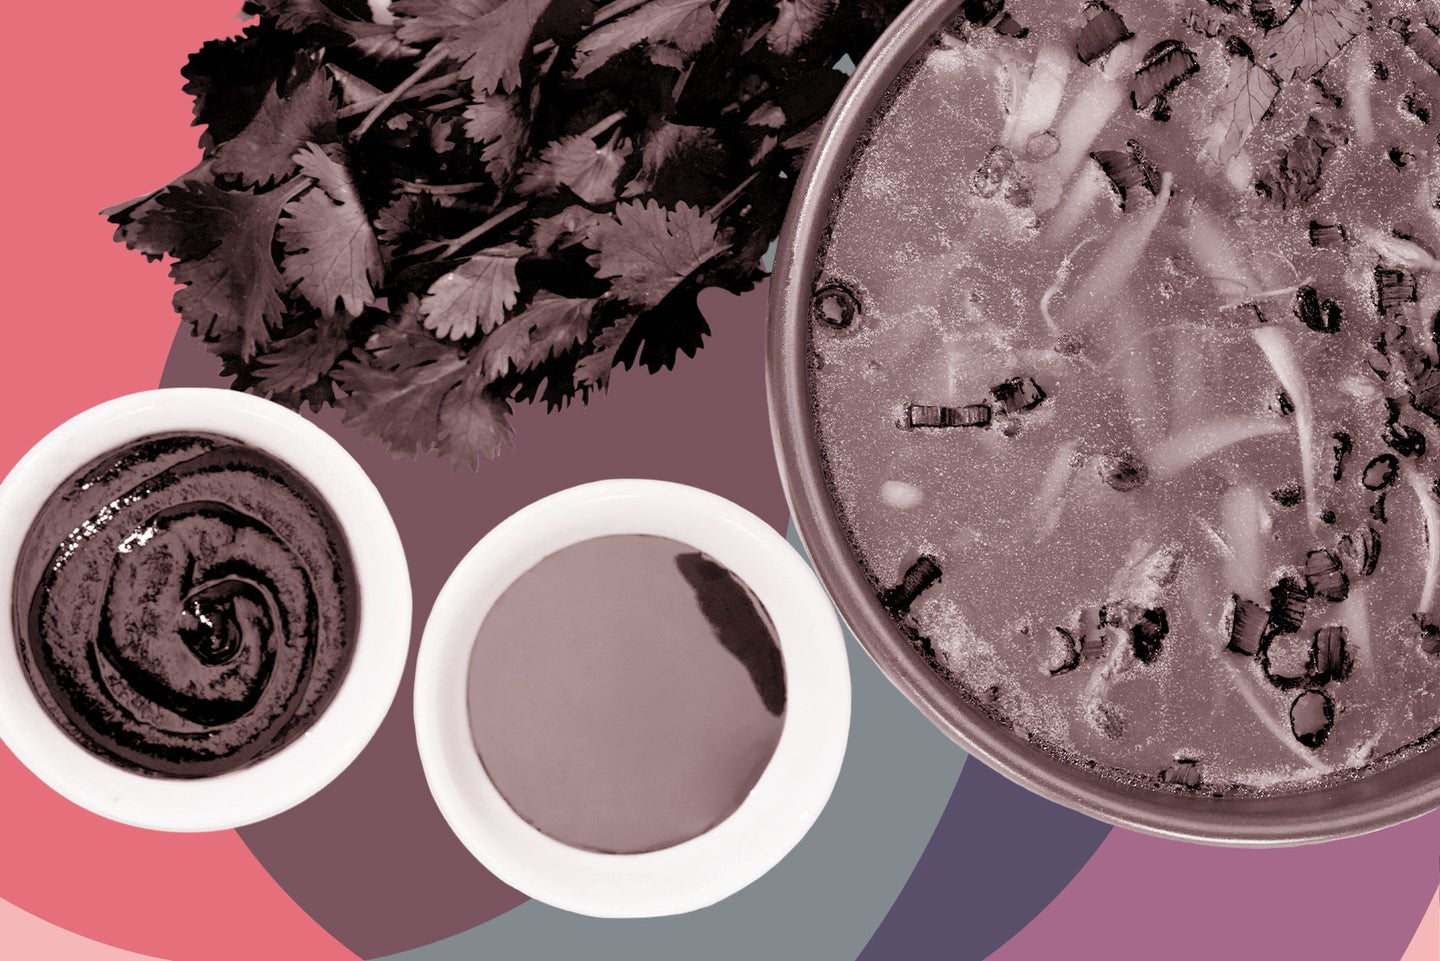 Soy sauce, cilantro, broth, and other umami foods on a pink and purple background